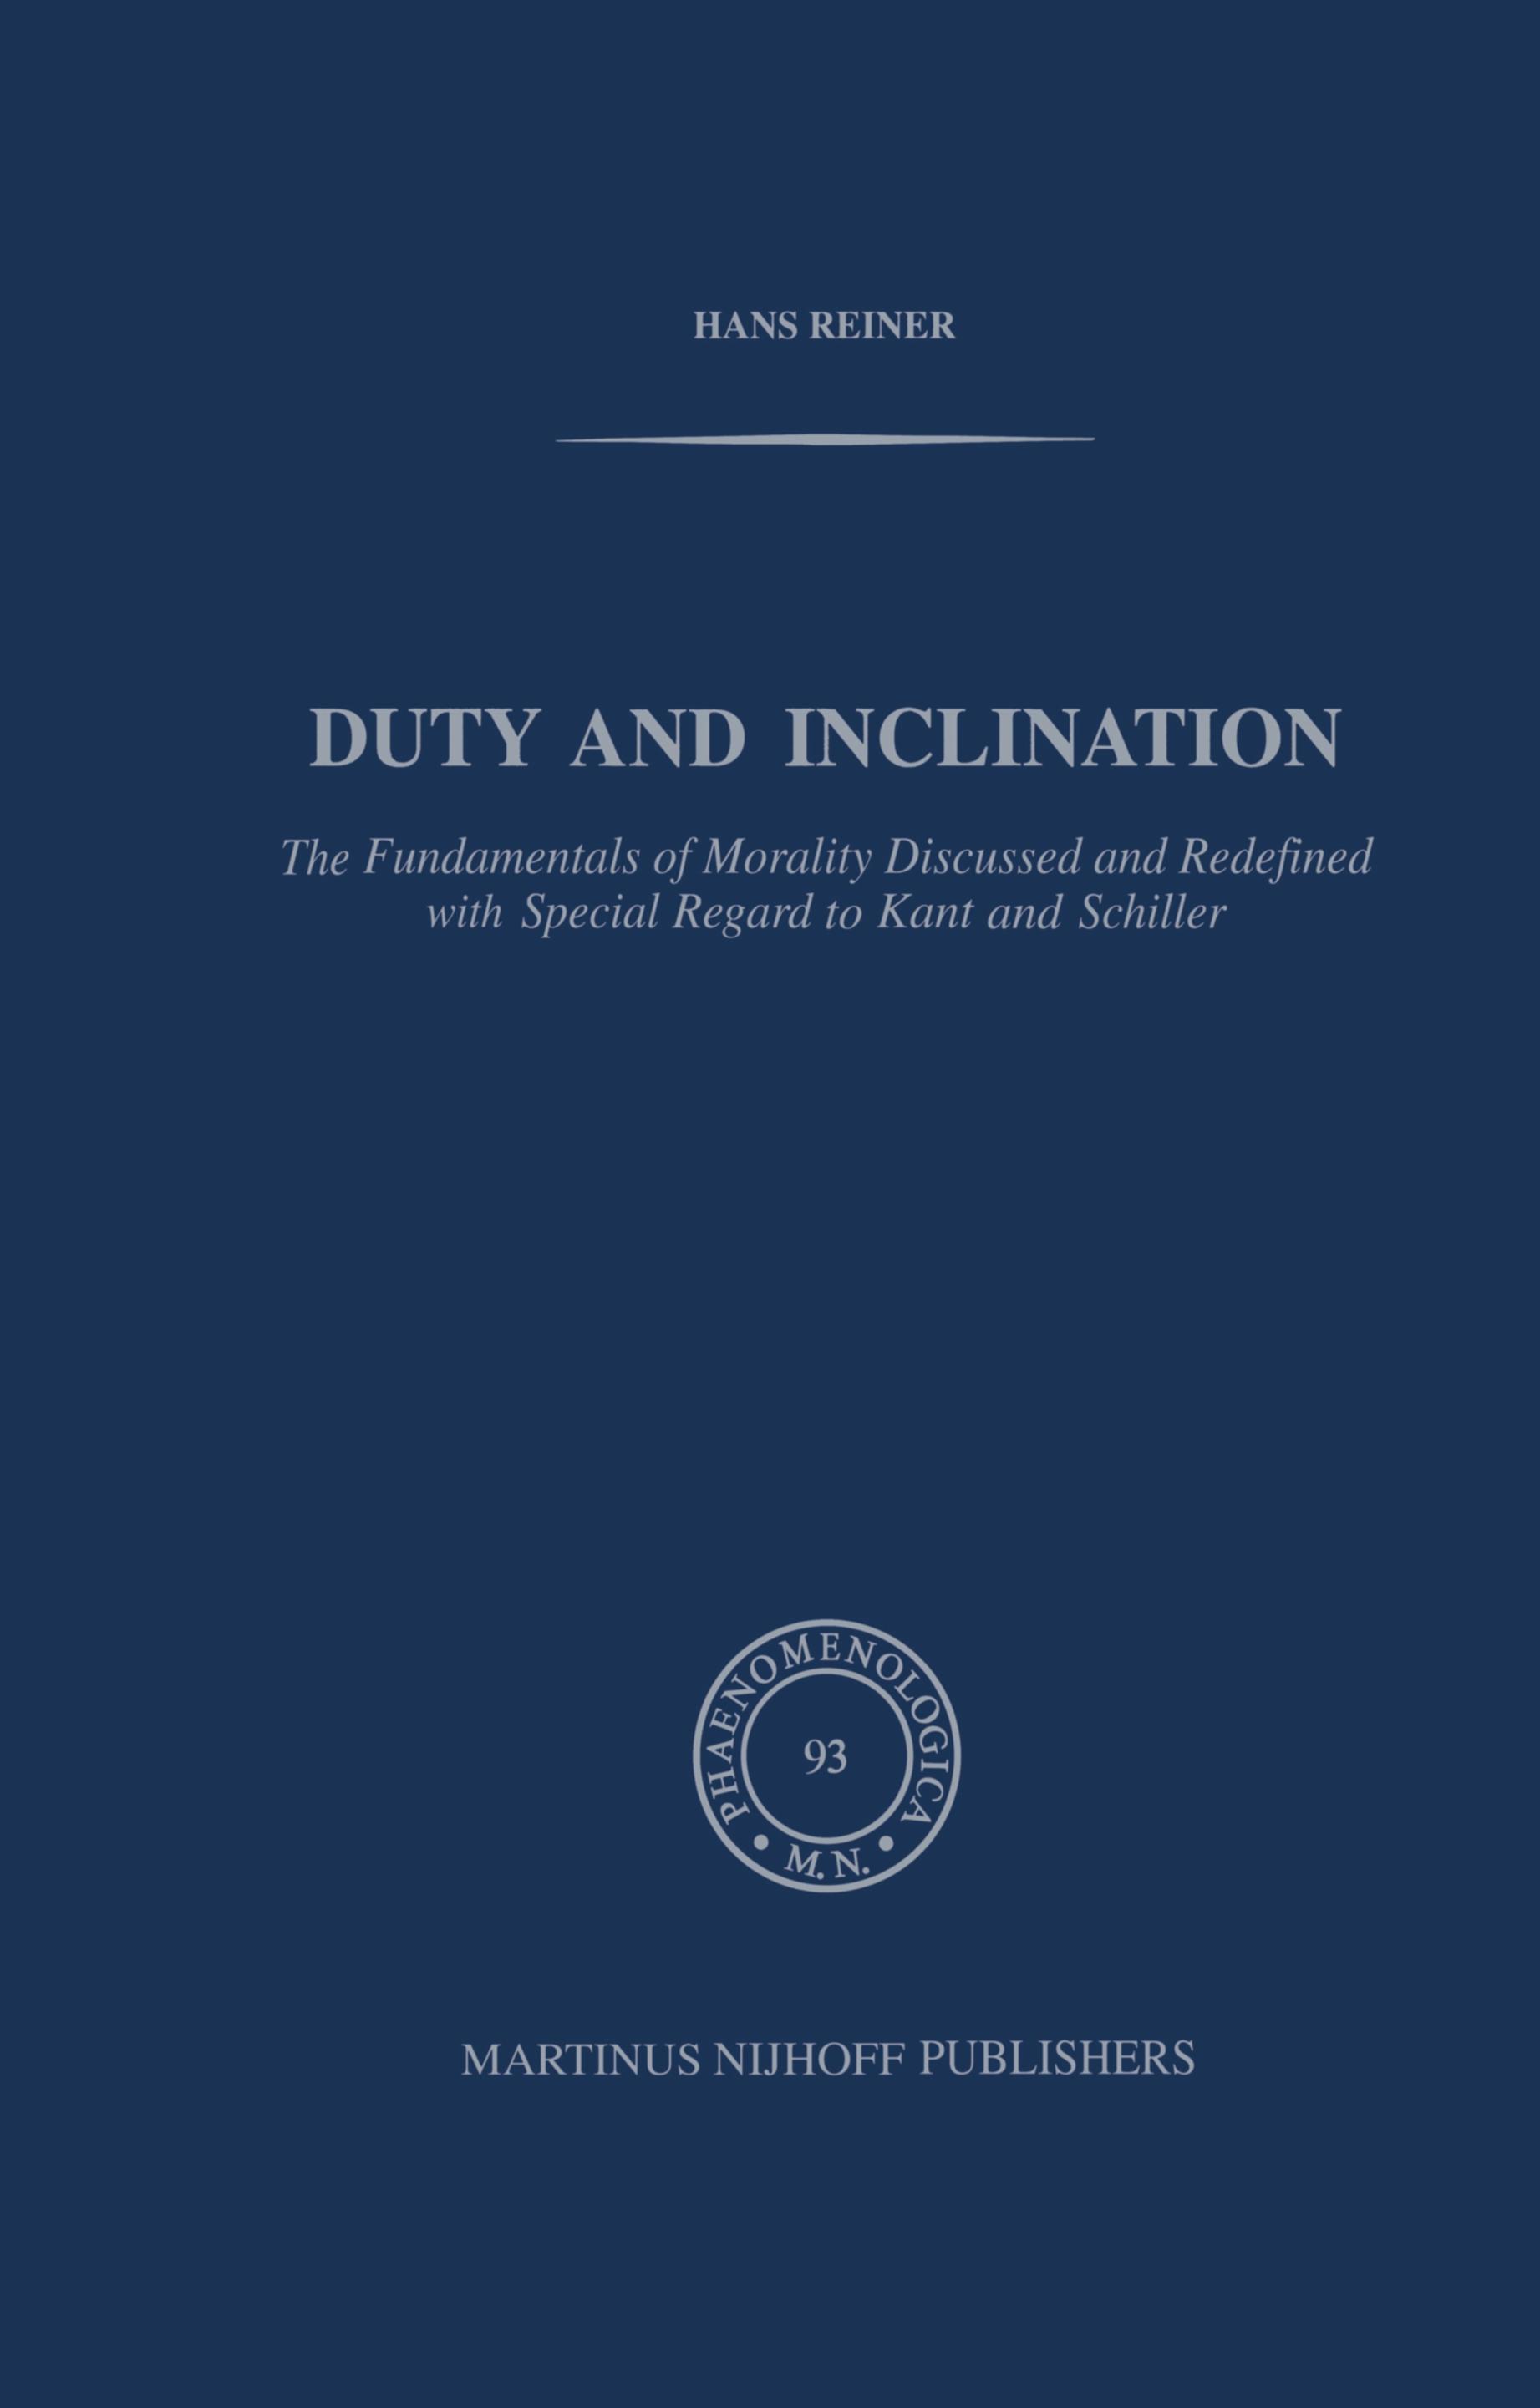 Duty and Inclination The Fundamentals of Morality Discussed and Redefined with Special Regard to Kant and Schiller - H. Reiner